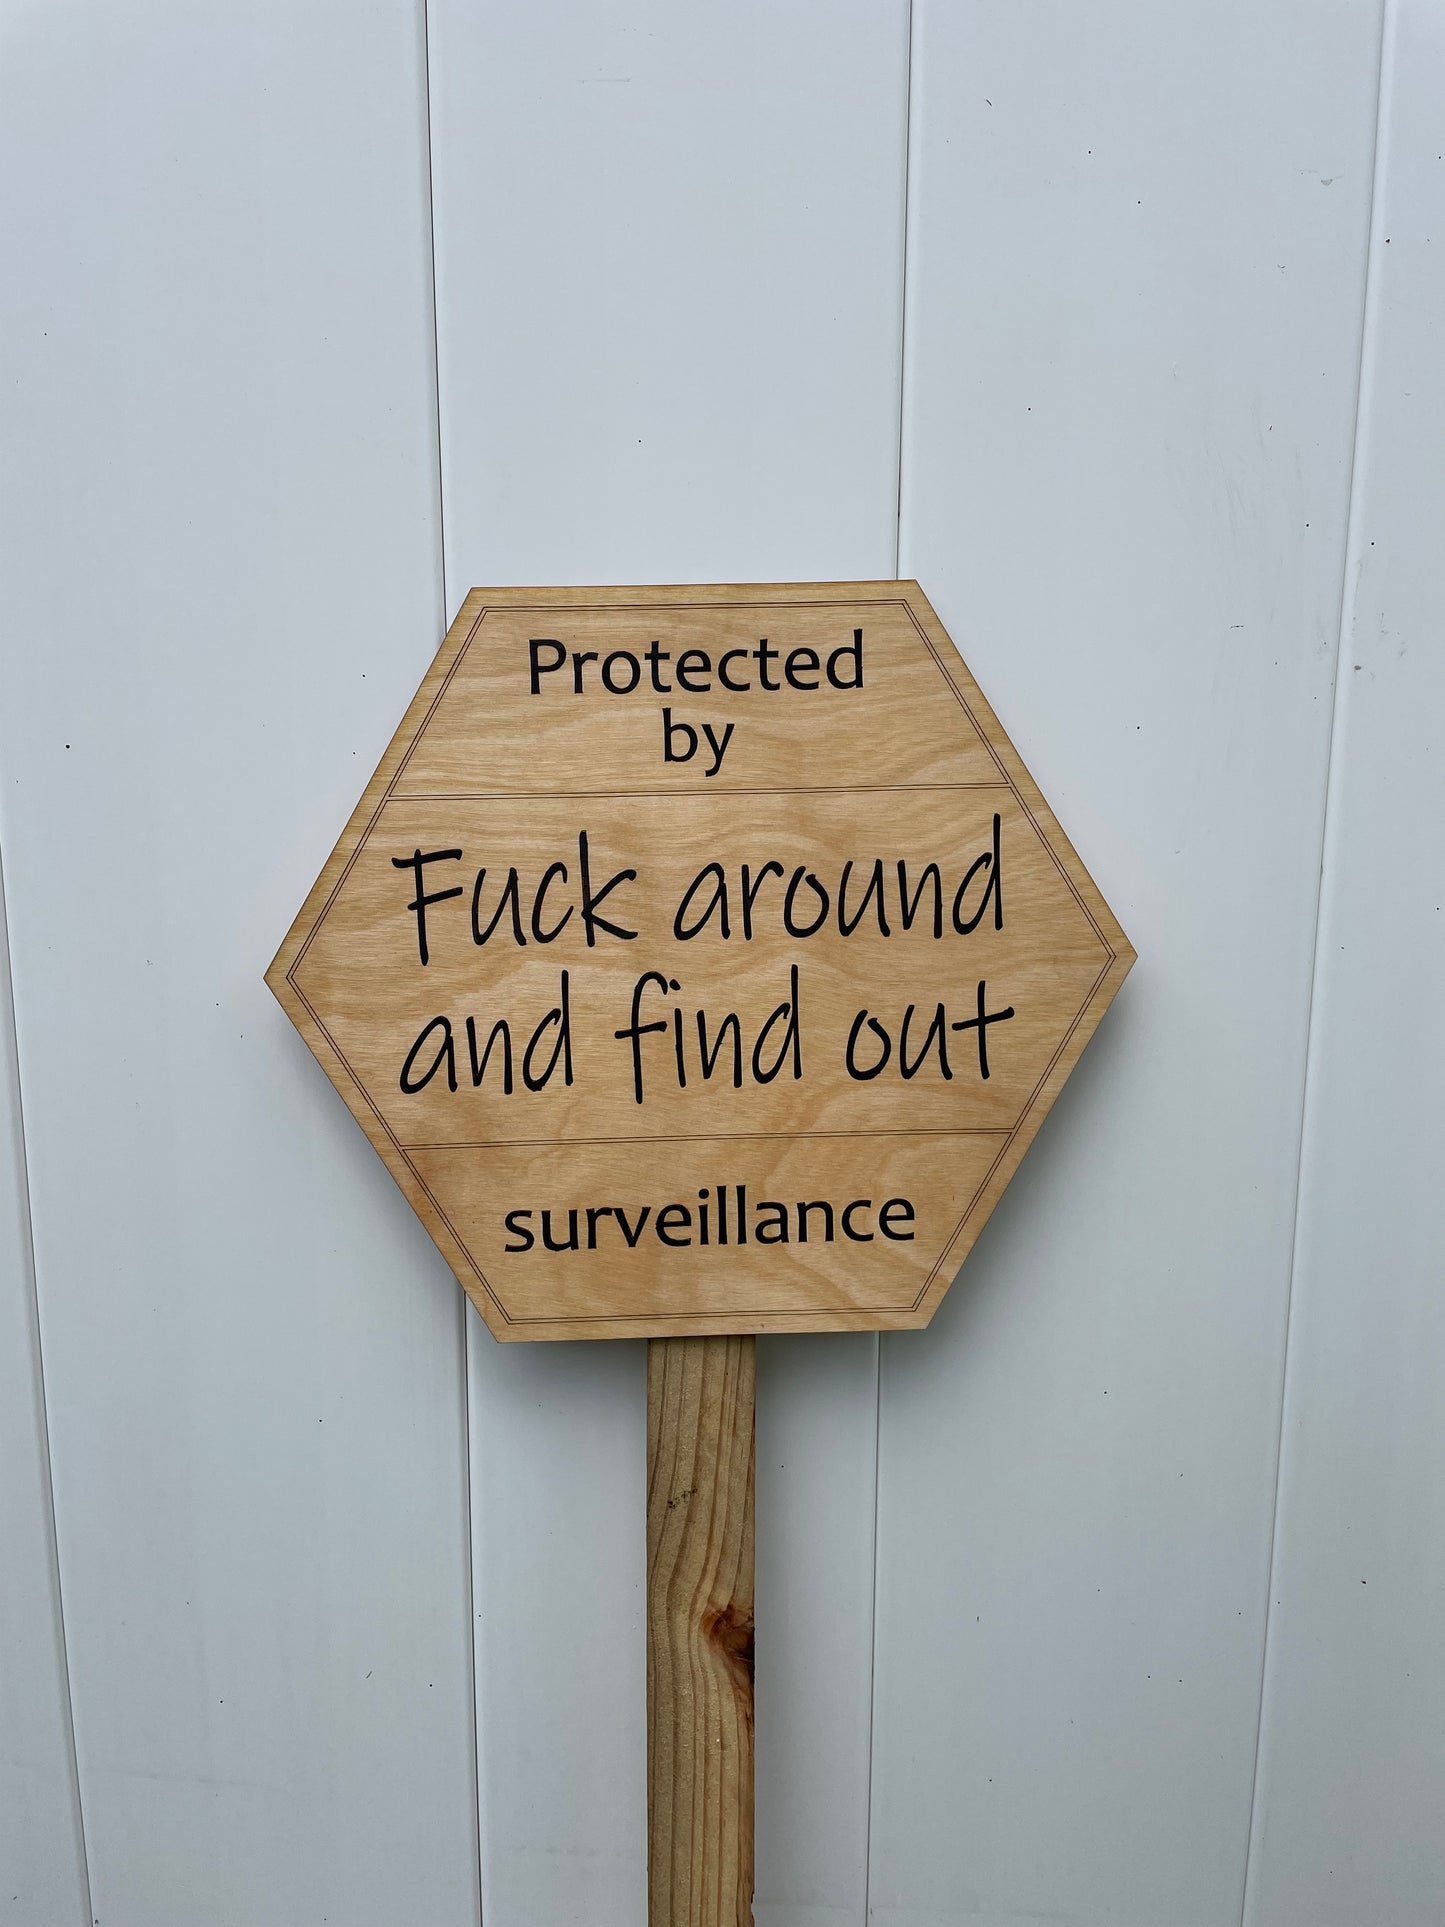 Surveillance sign. Fuck around and find out.